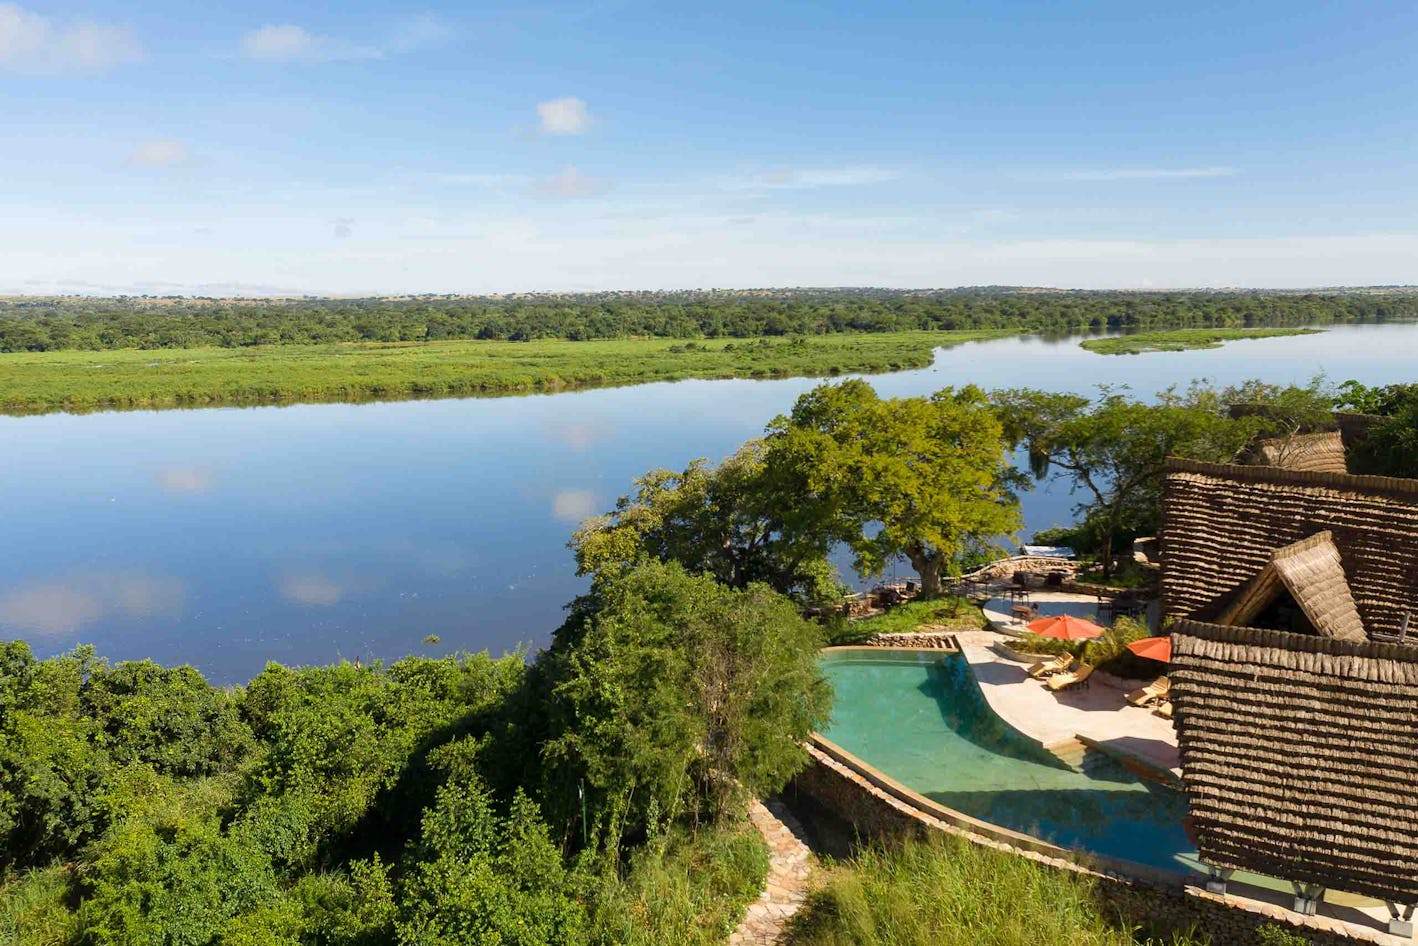 With a new lease on life, this uber private and well-placed lodge offers an all-access pass to the beauties of Uganda. Enjoy the thunder of nearby Murchison Falls as comfort and nature combine!